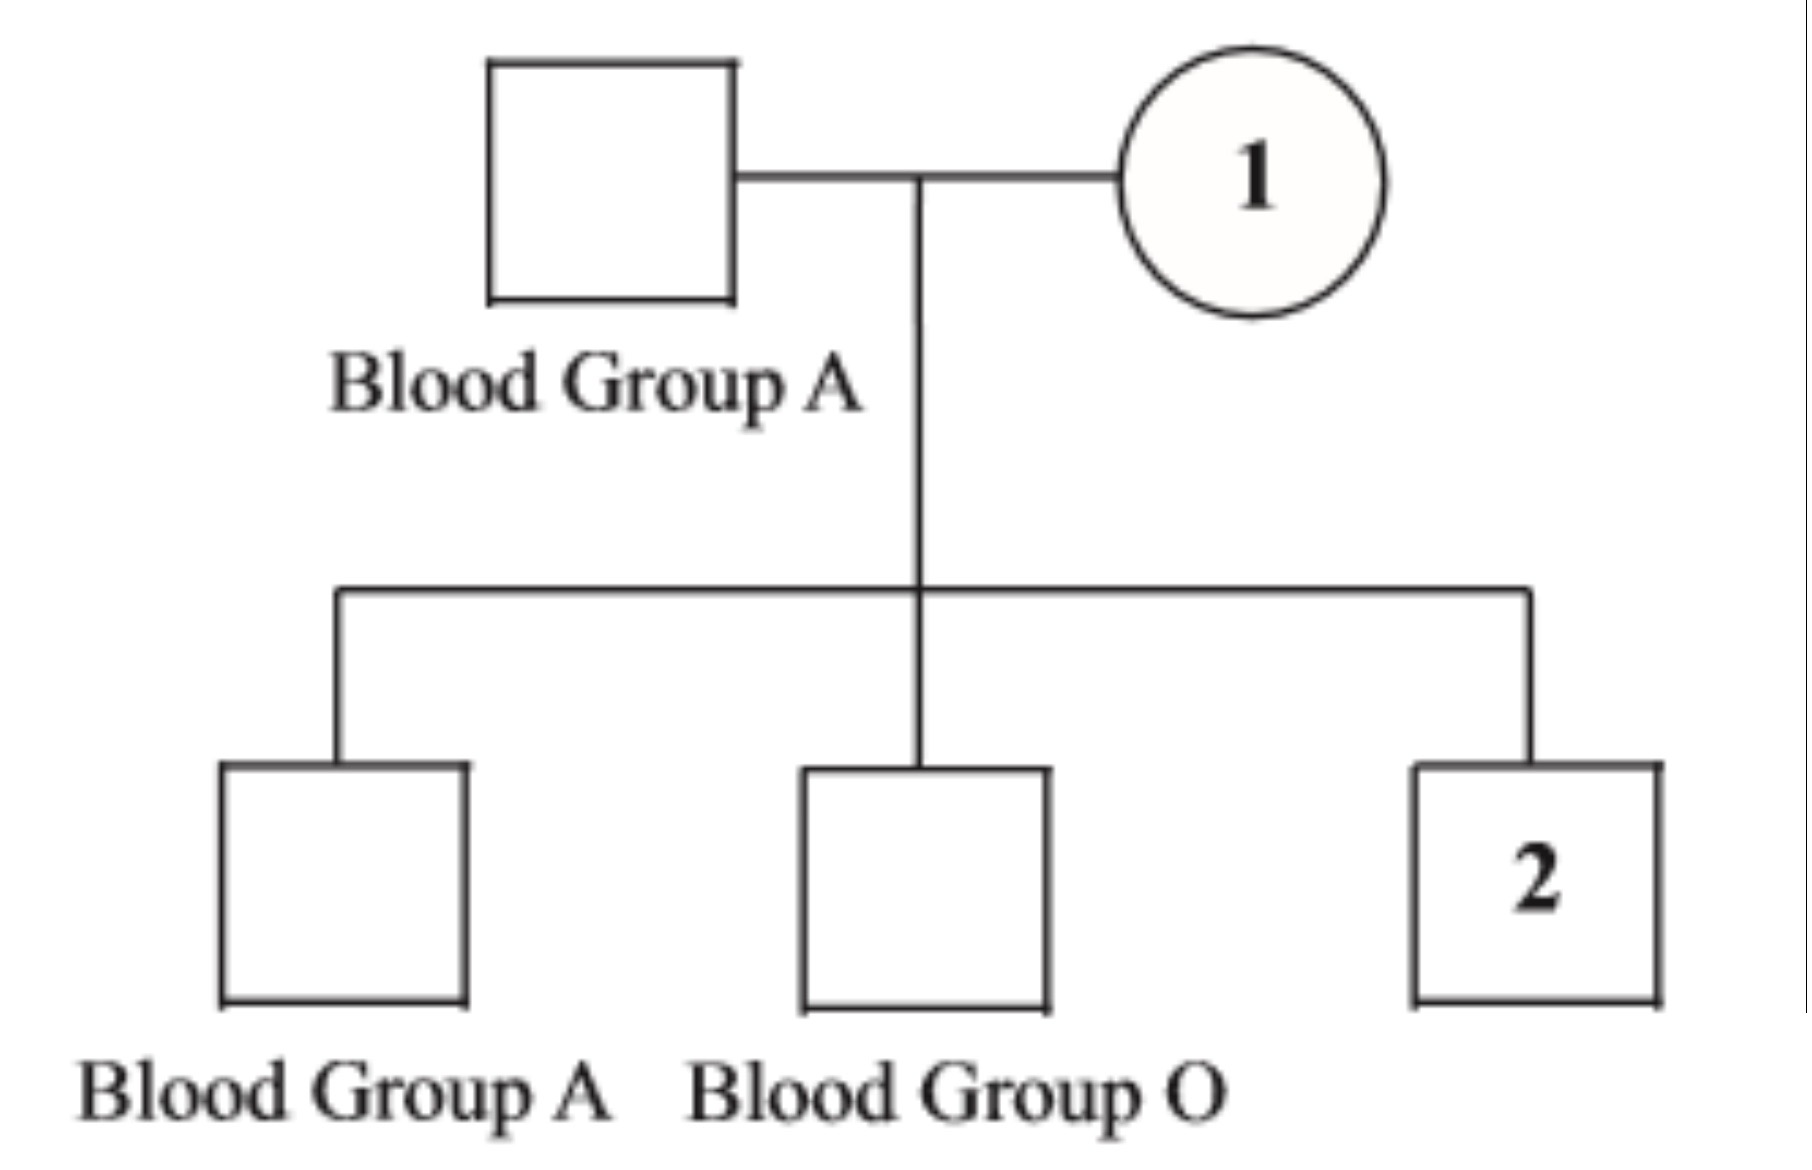 <p>The pedigree chart below shows the blood types of three members of a family.</p><p>Which of the following could be the blood types of <strong>individuals 1 and 2</strong>?</p><ol><li><p>A, AB</p></li><li><p>AB, B</p></li><li><p>O, B</p></li><li><p>B, A</p></li></ol>